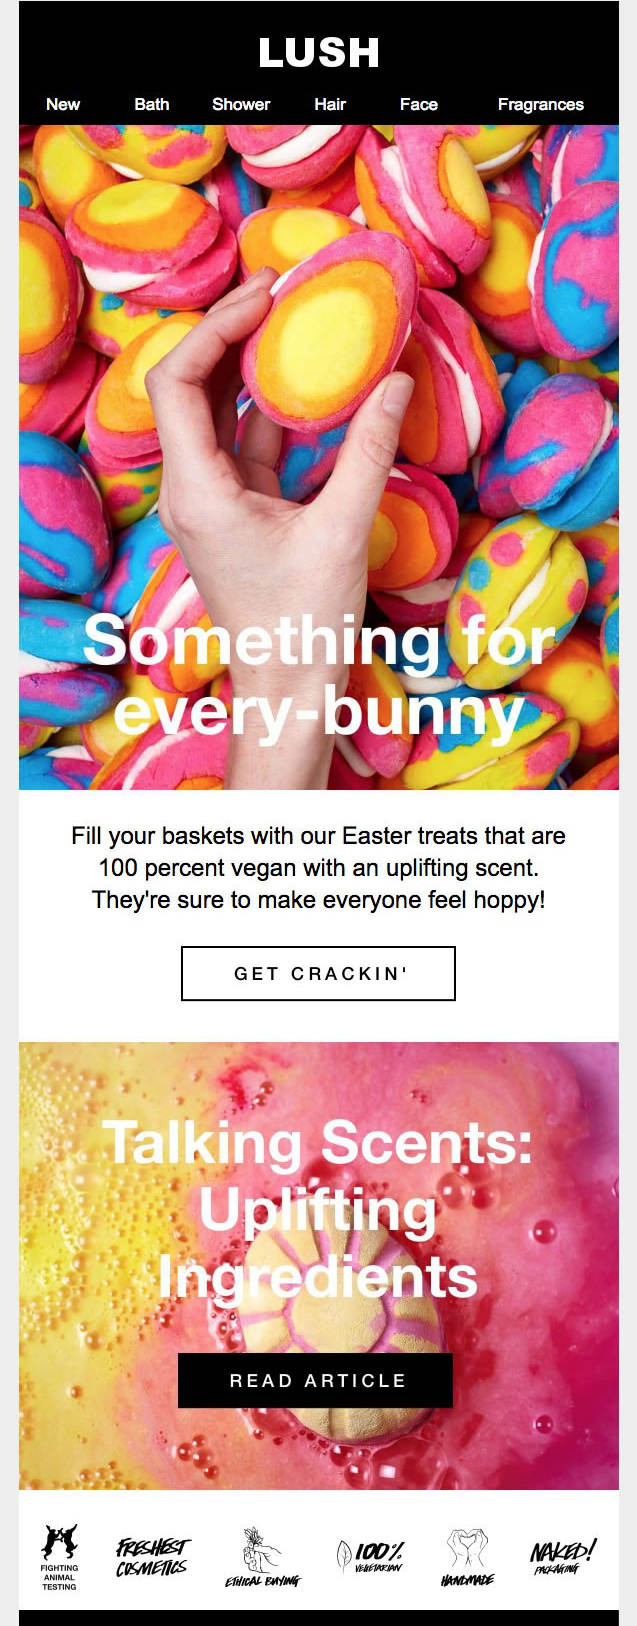 Lush using bright and bold coloring, along with their brand beliefs in minimalist font at the bottom, drawing emphasis